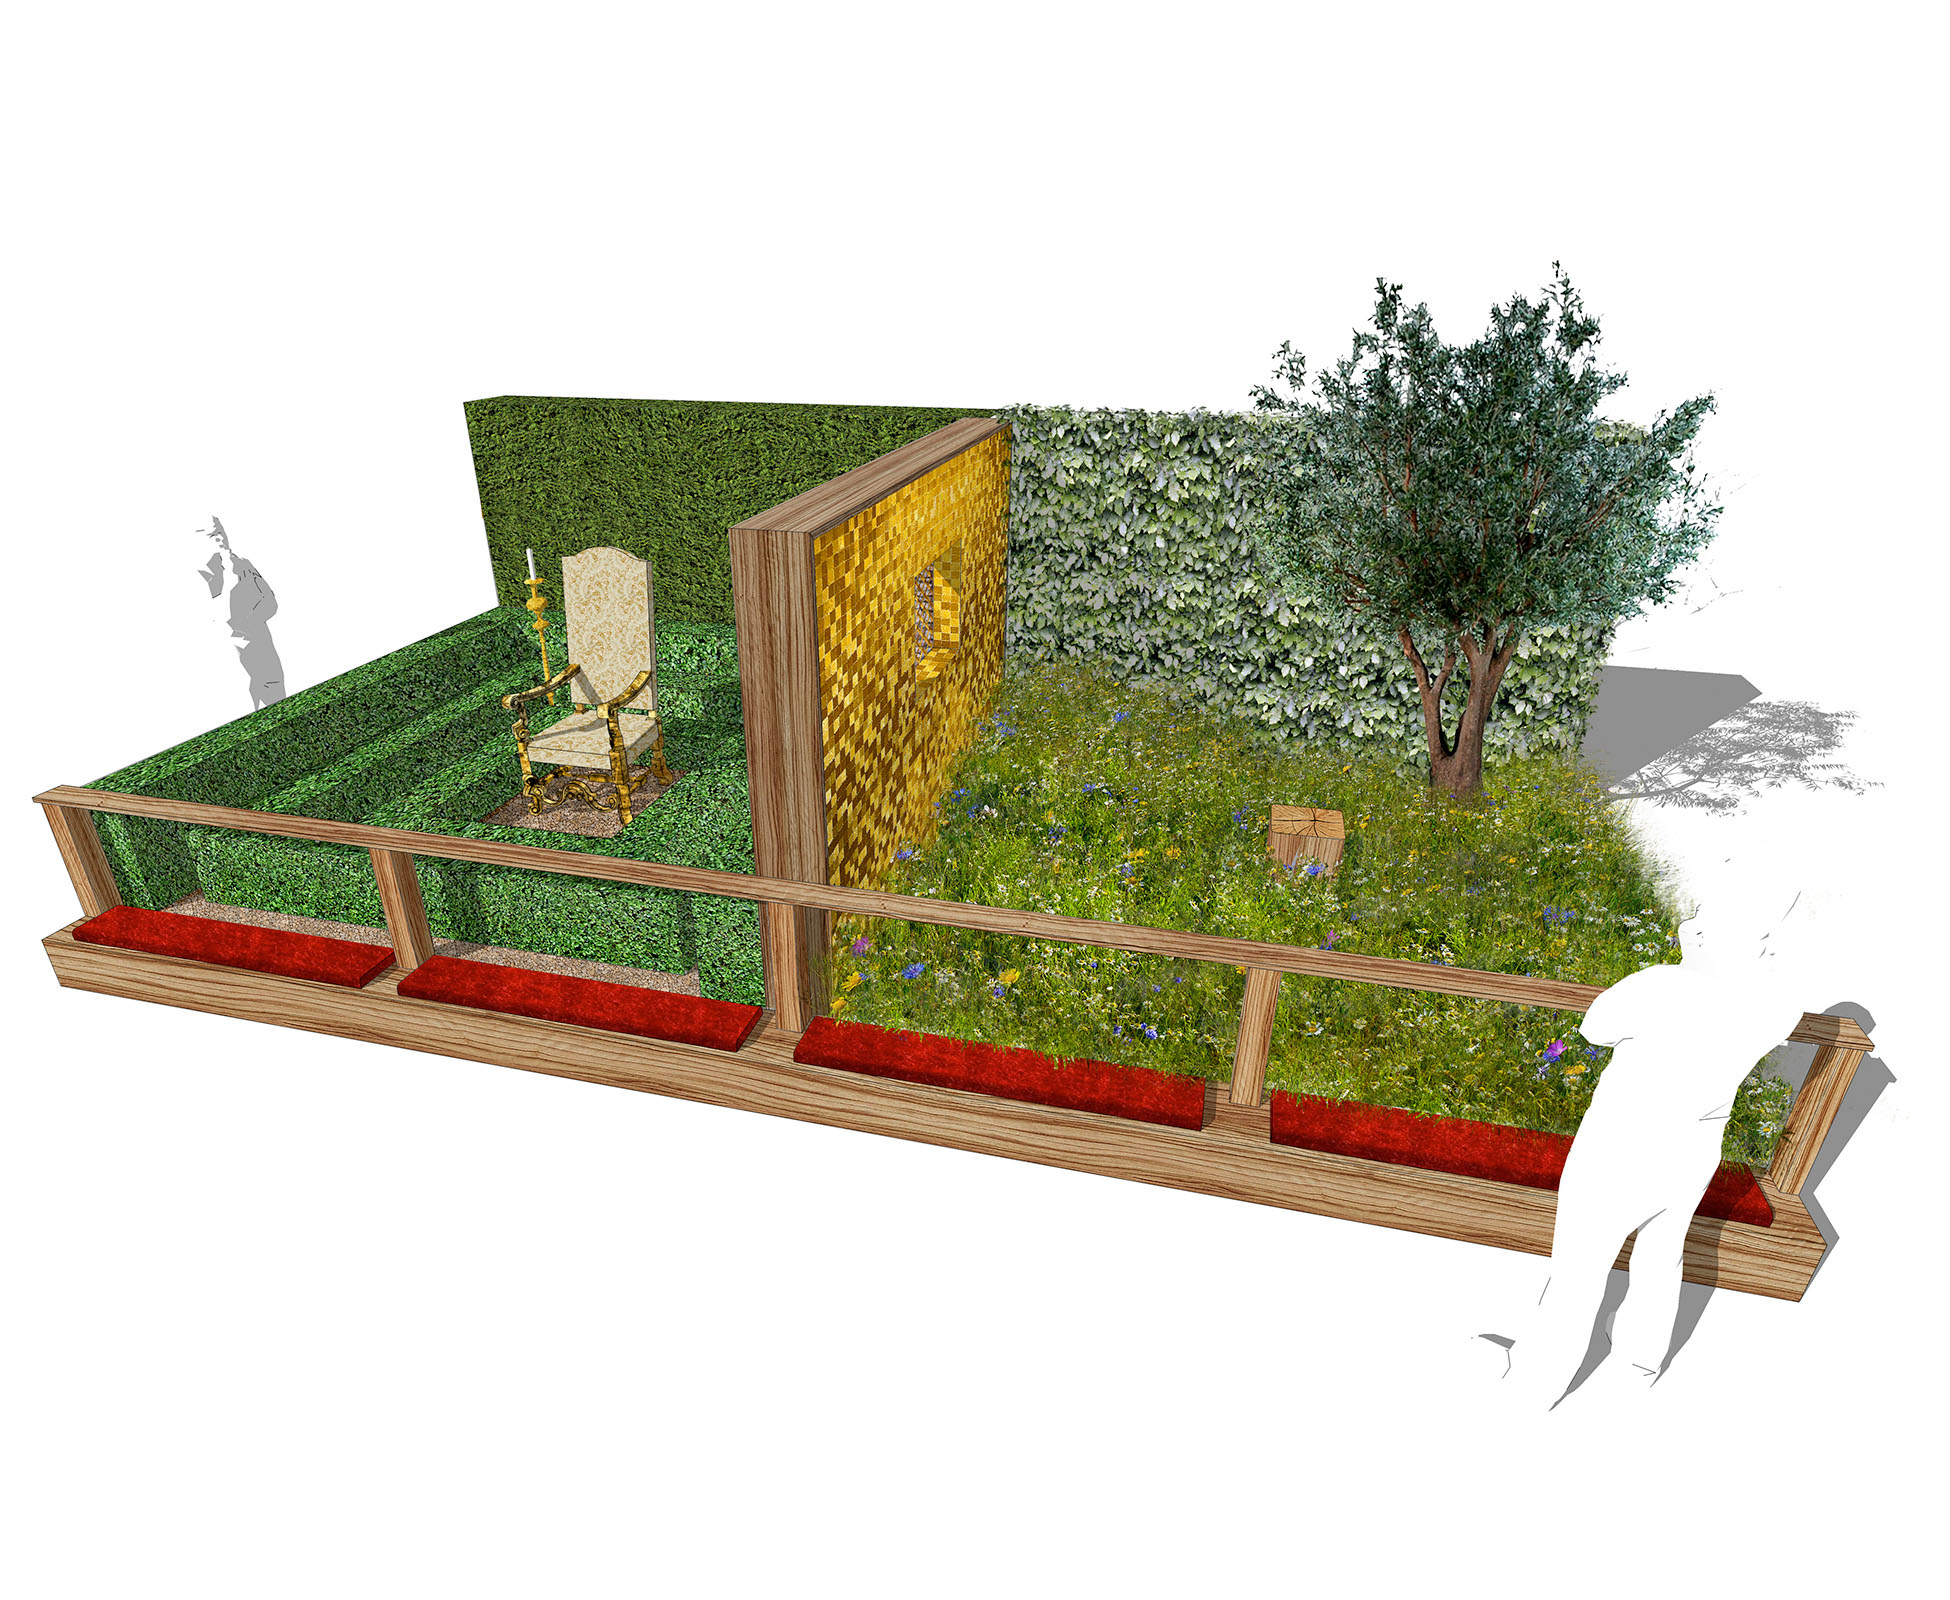 This conceptual garden designed on the theme of the seven deadly sins, expresses Greed at Hampton Court Palace Show Garden. Original concept and sketch design presented to the RHS in the early stages. 